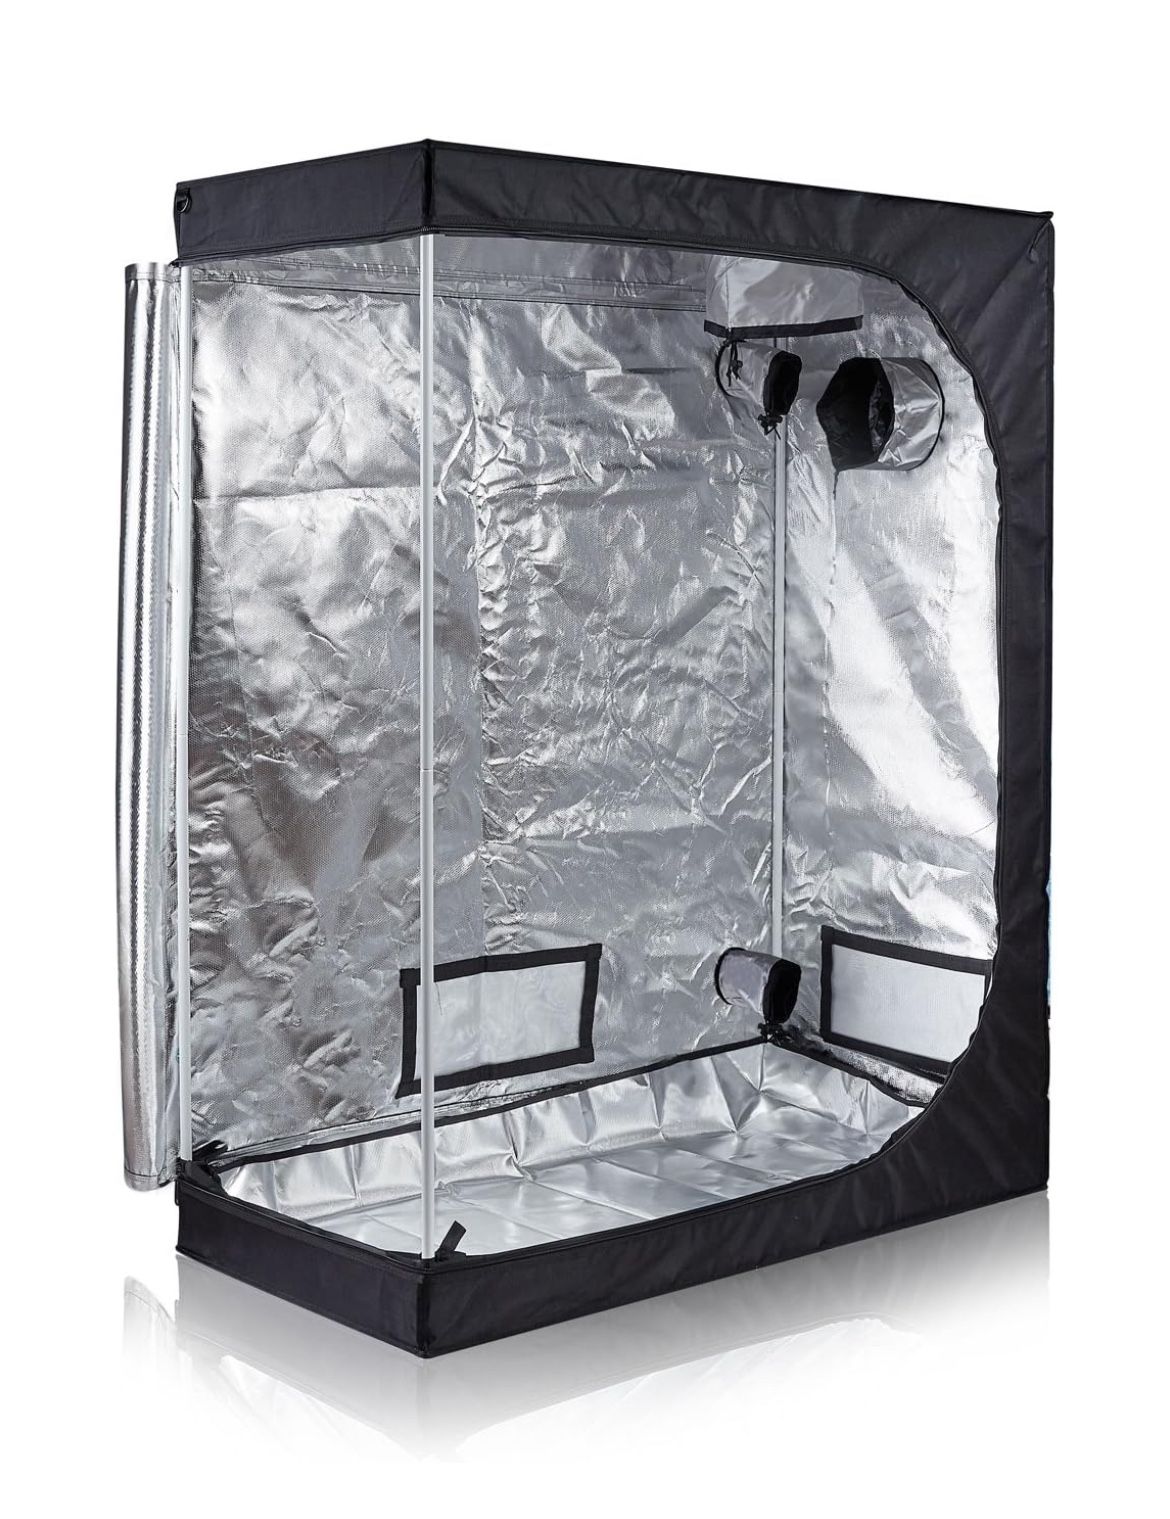 High Reflective Grow Tent, Seed Room, Grow Cultivate Indoor Plants